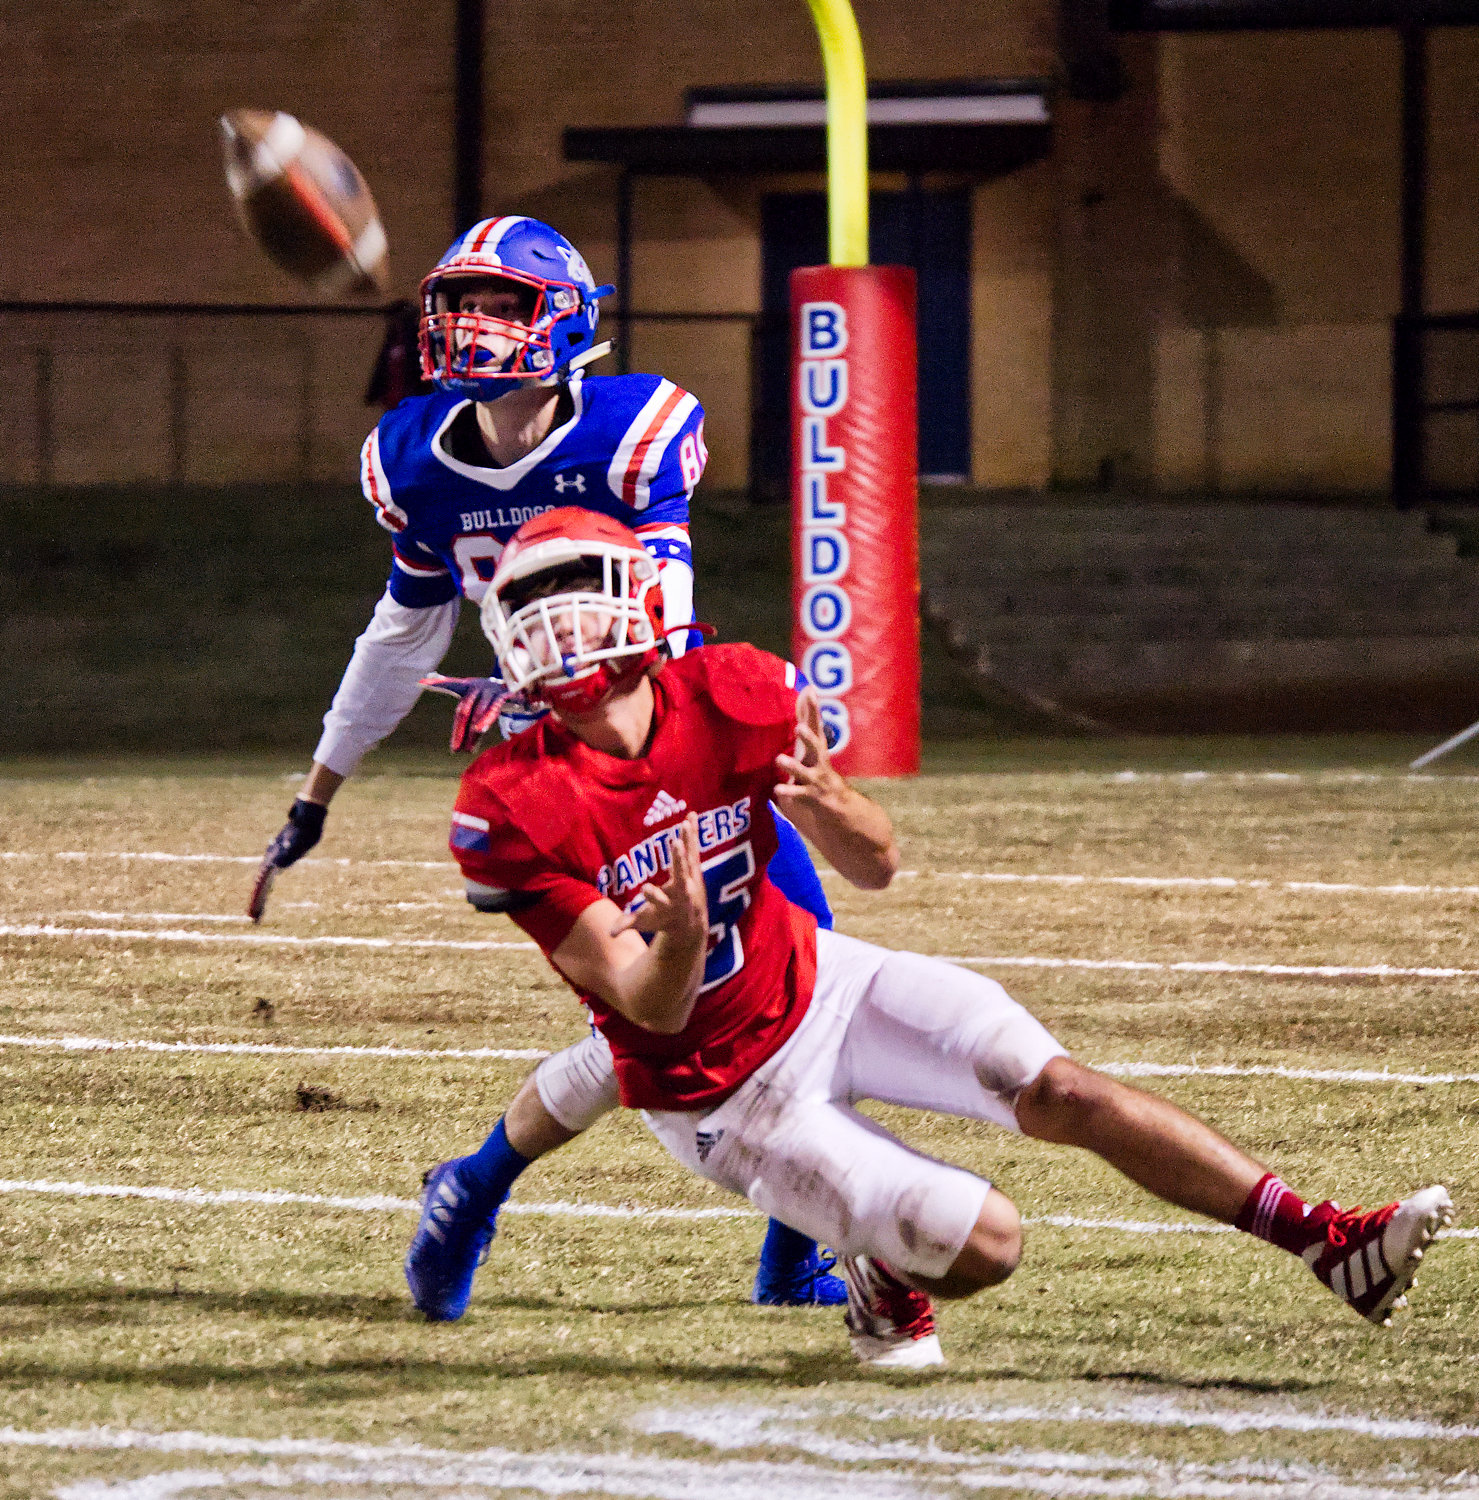 Alba-Golden’s Tim Mitchell (15) makes a good catch after being closely defended by Quitman’s ryflie Flanagan (88).